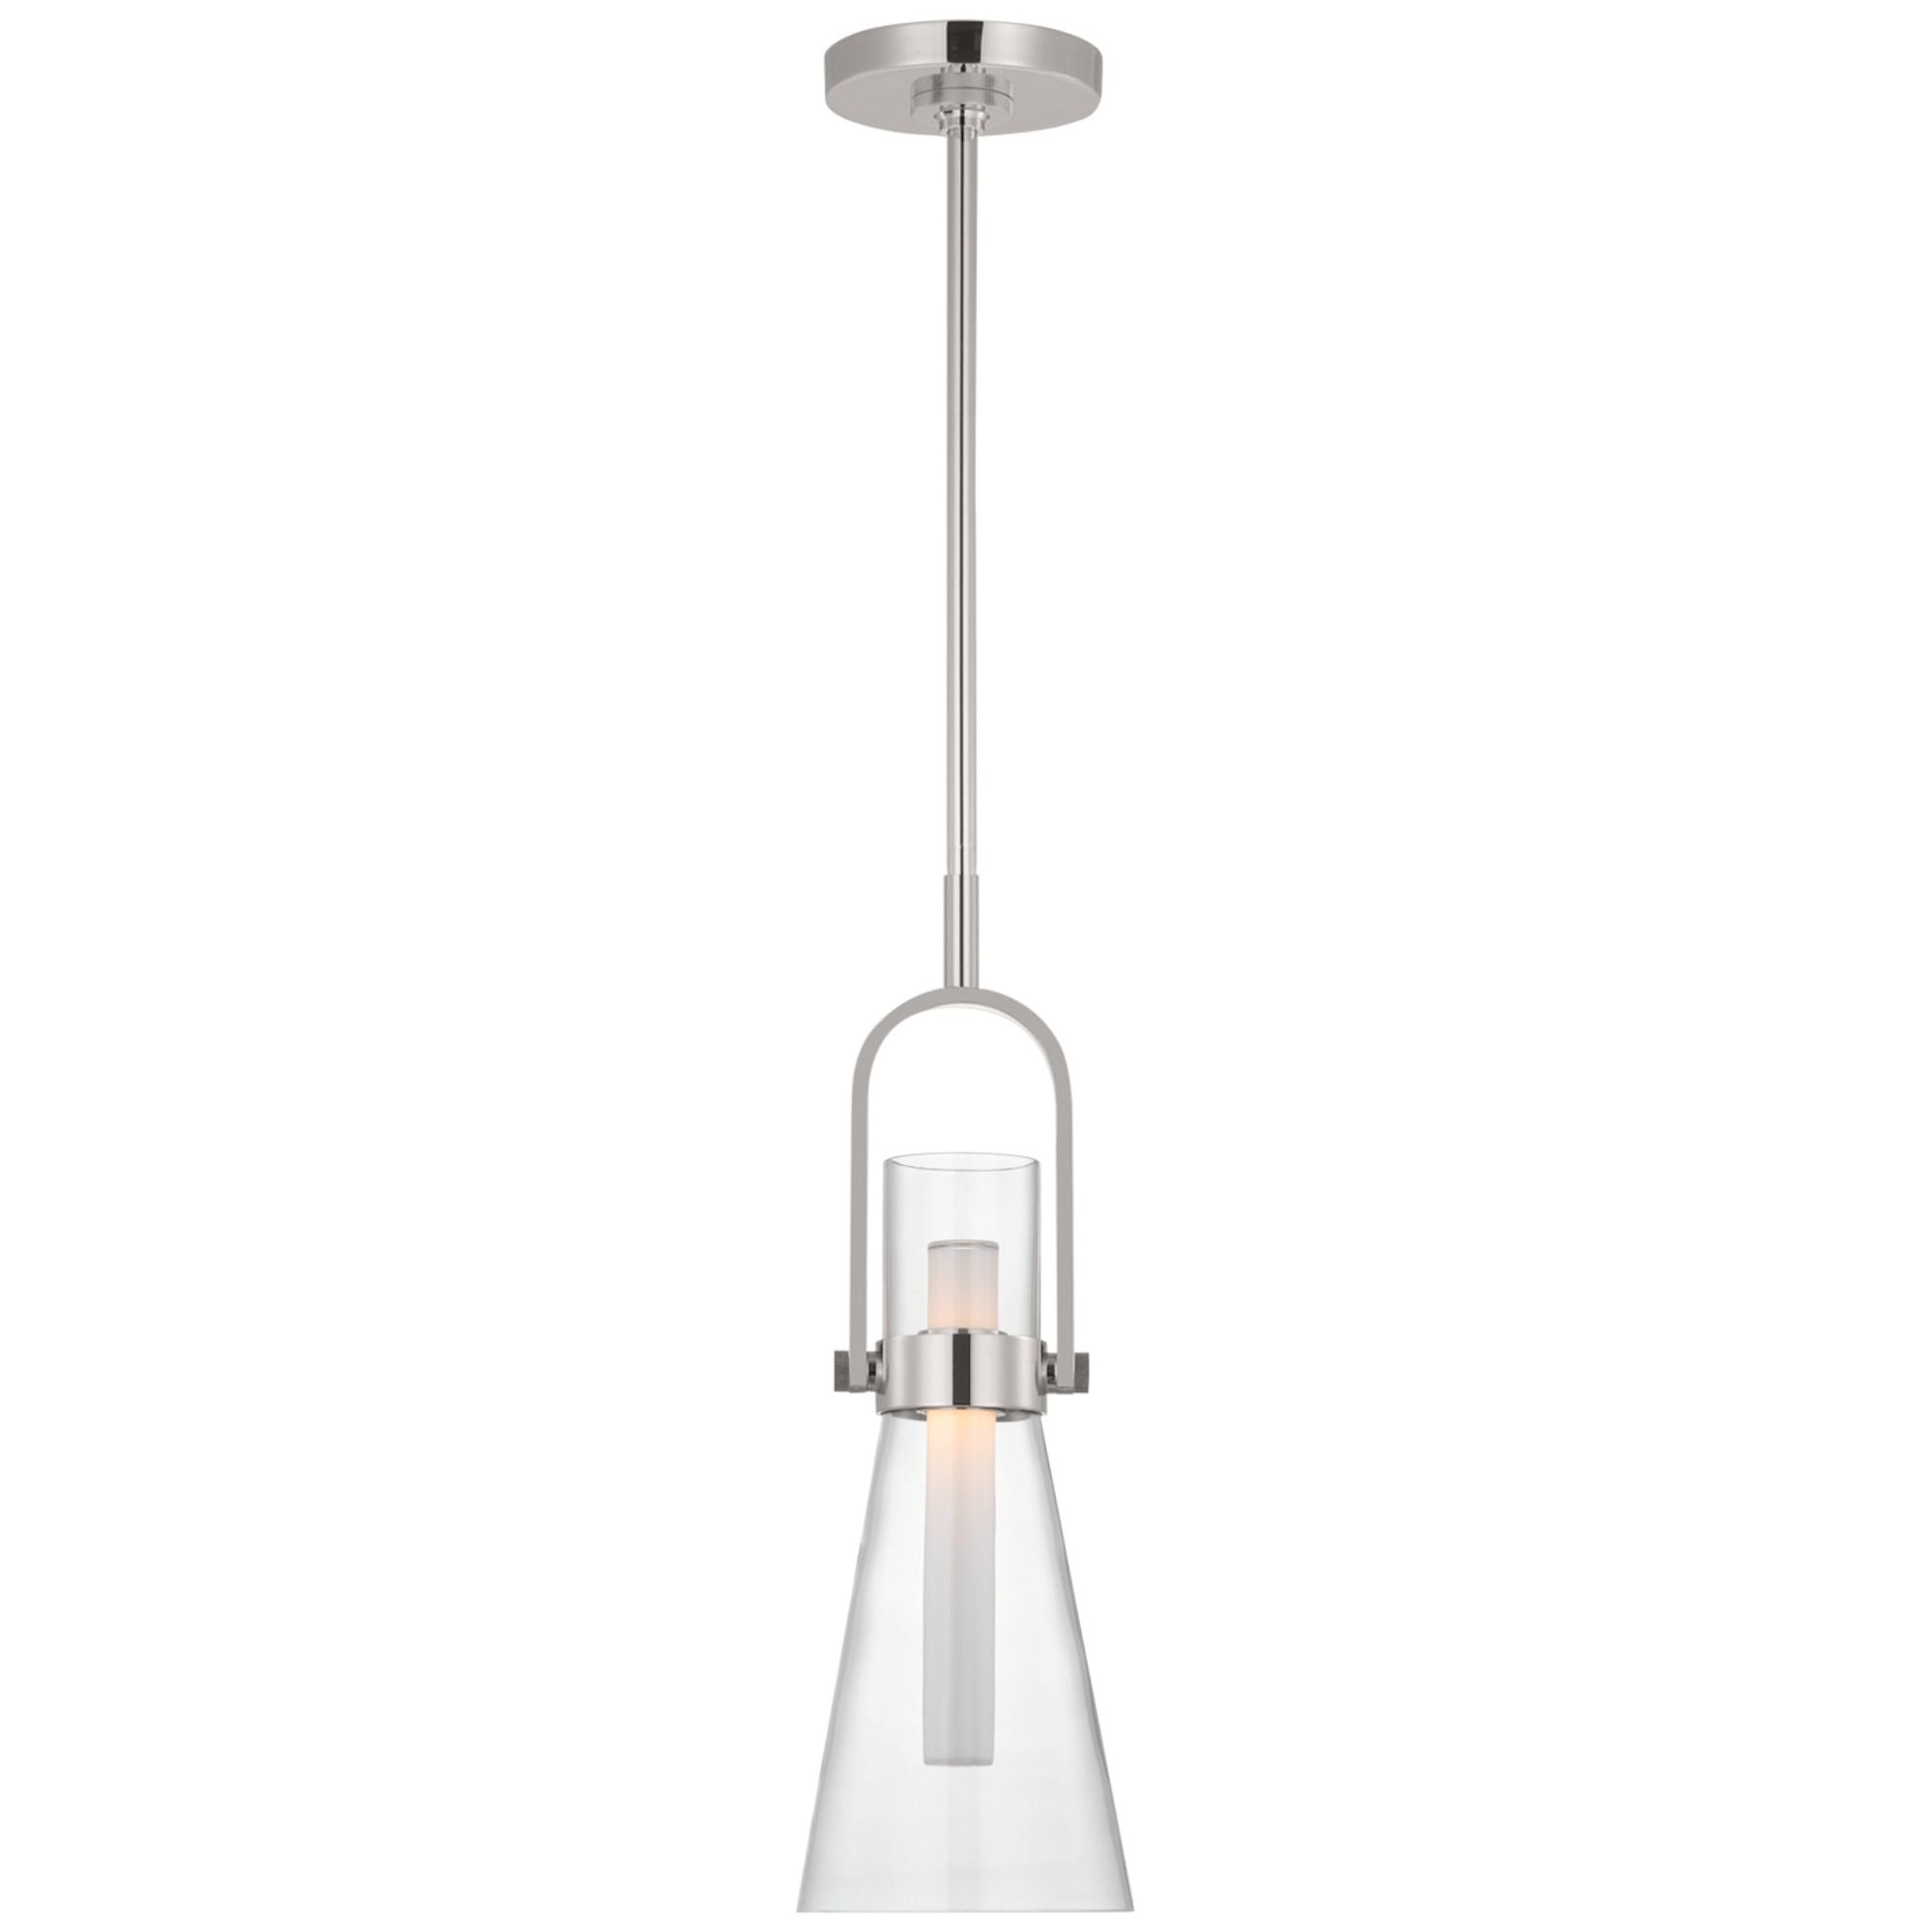 Ian K. Fowler Larkin 7" Conical Pendant in Polished Nickel with Clear Glass